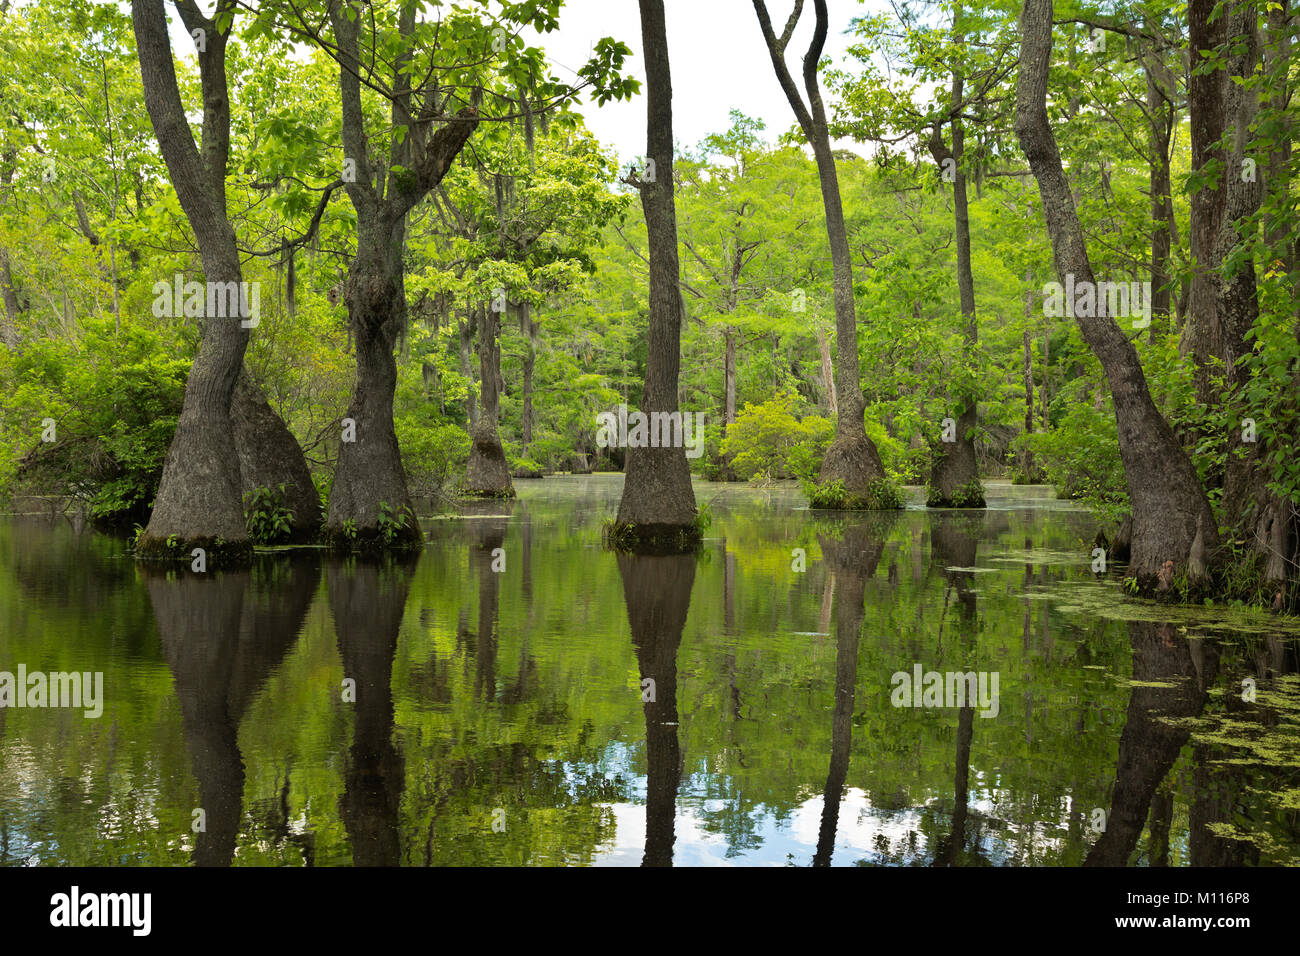 NC01450--00...NORTH CAROLINA - Graceful trees rising out of the cypress swamp reflecting in the still waters of Merchant Millpond in Merchant Millpond Stock Photo